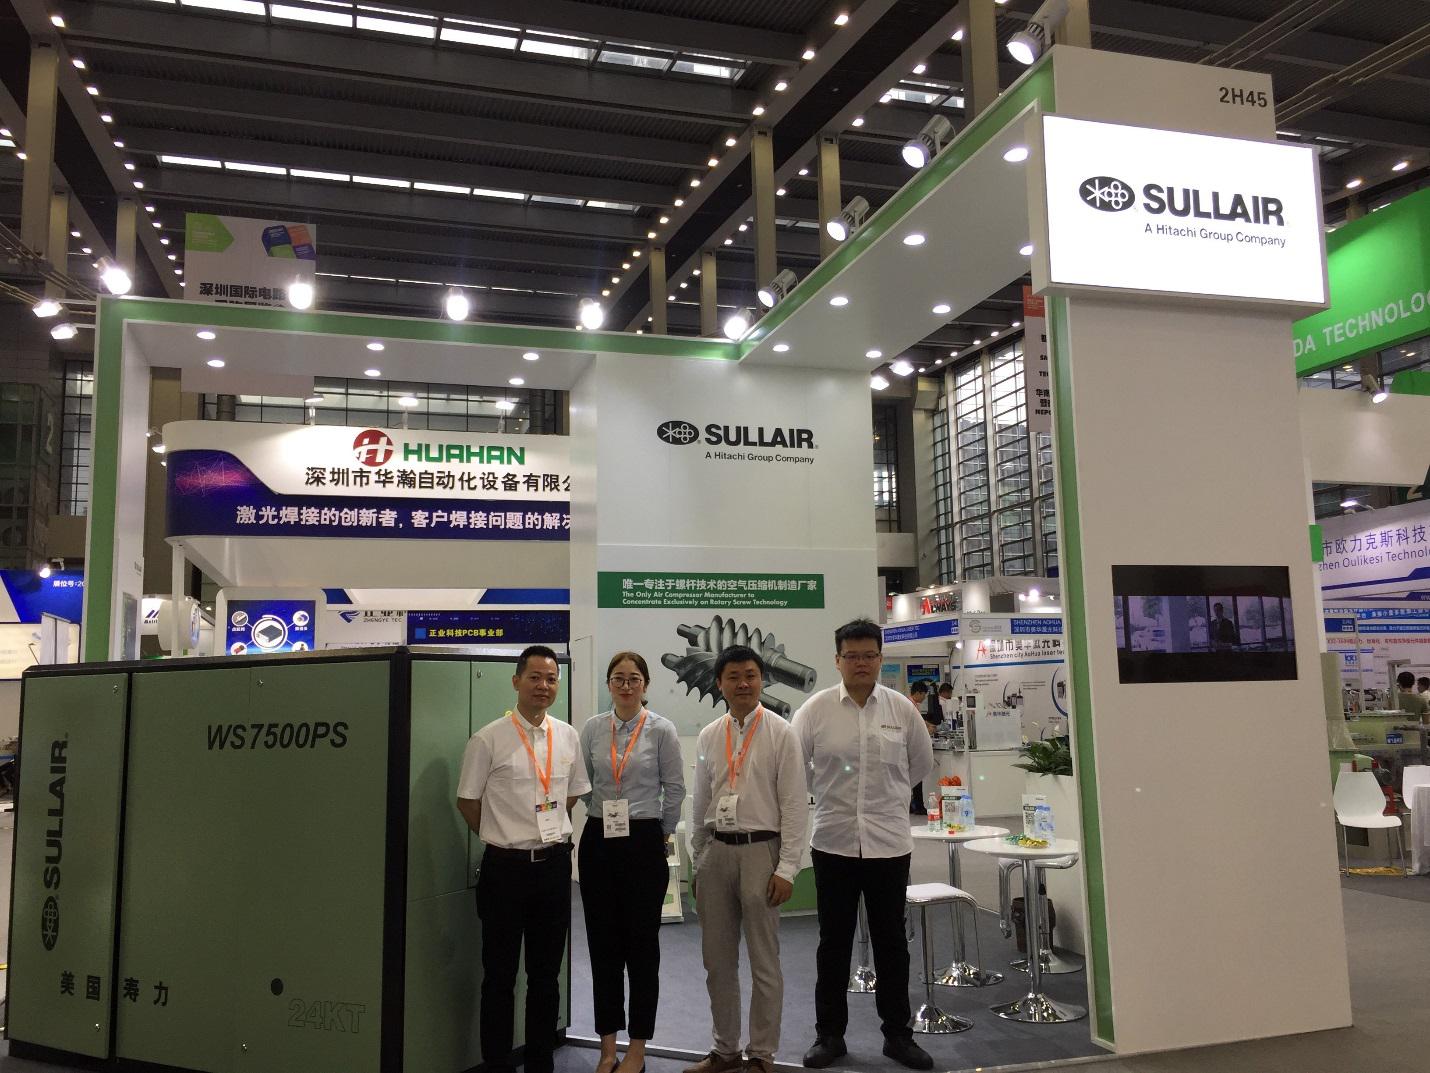 Sullair brings latest “star product” to the CS Show 2018 amid much acclaim